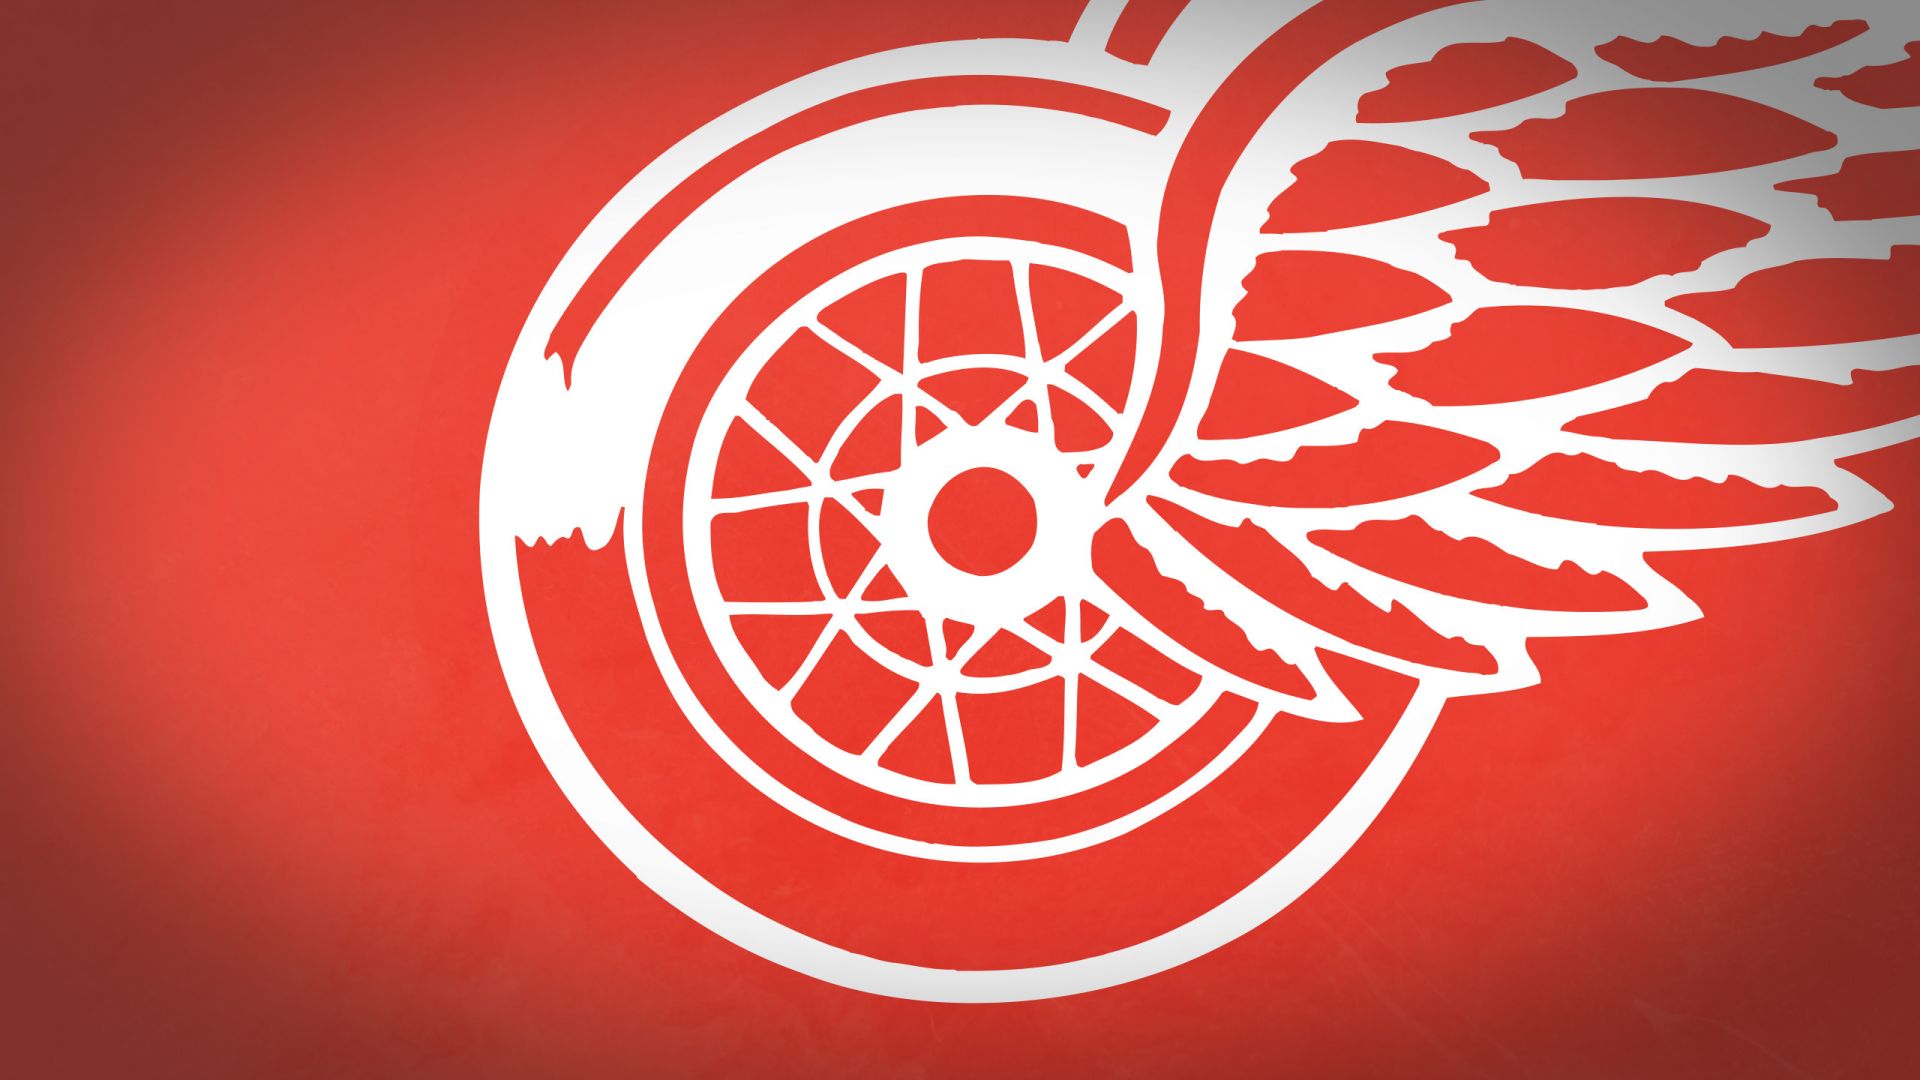 Detroit Red Wings Background